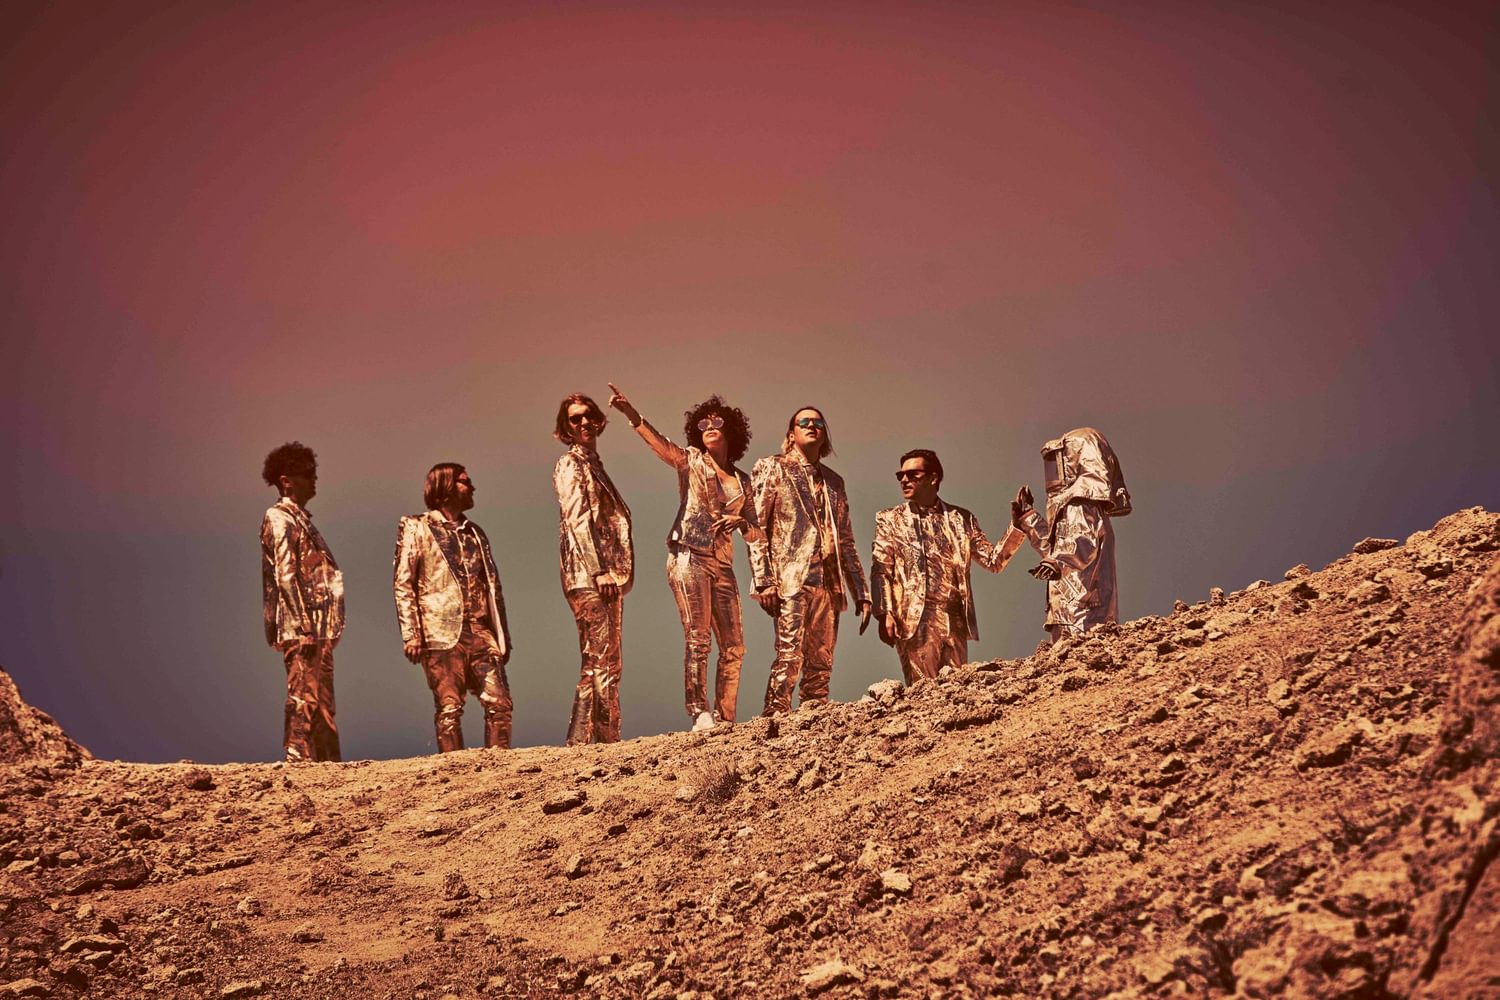 Arcade Fire share new track ‘Signs of Life’